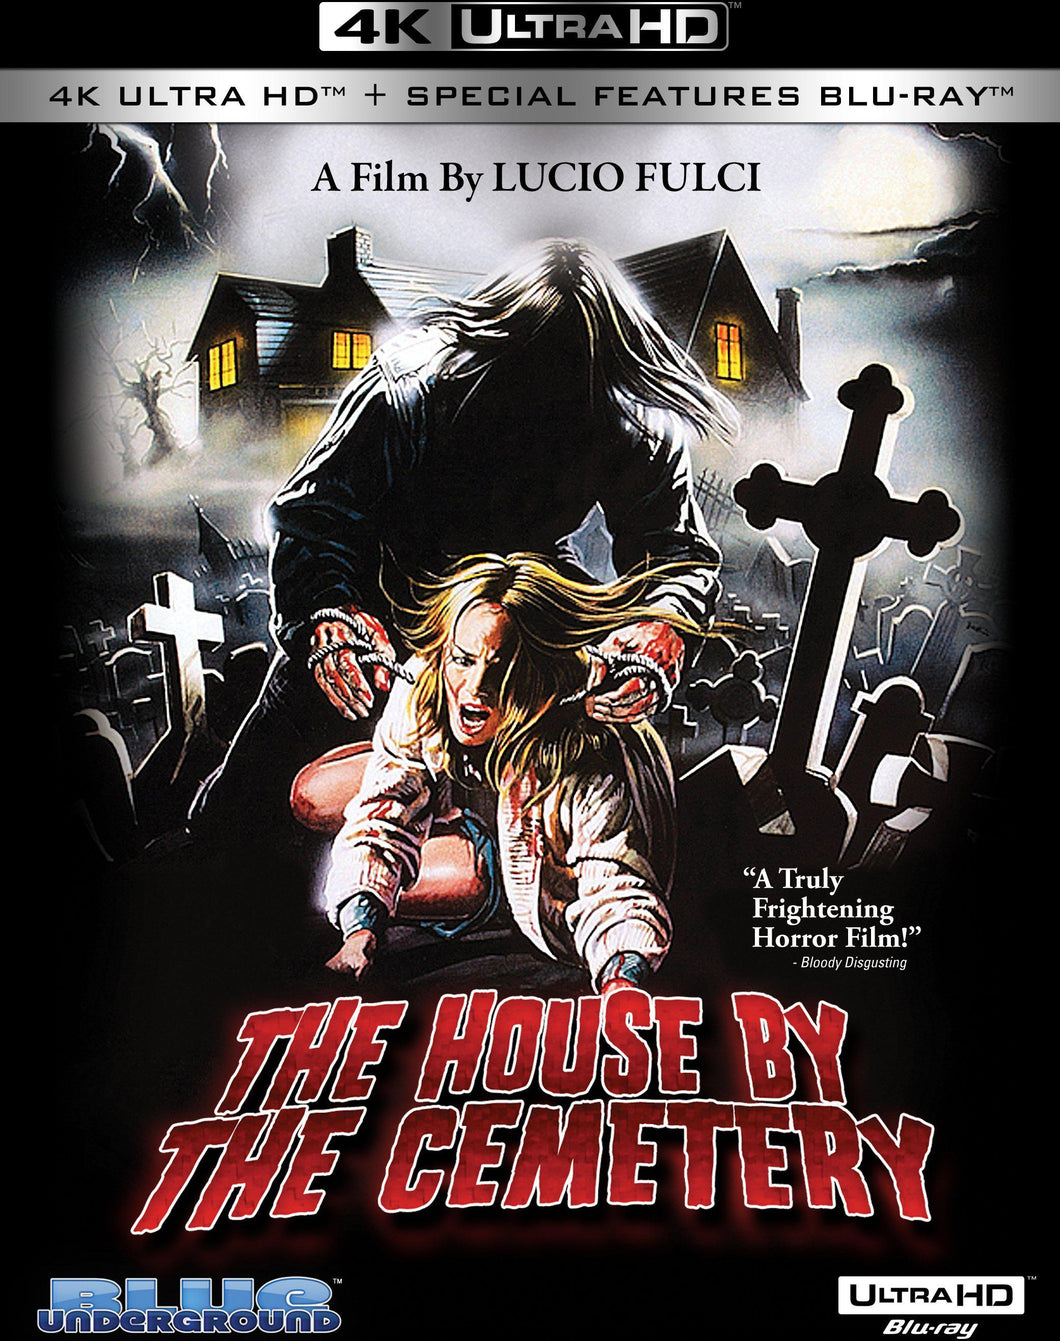 The House by the Cemetery 4K UHD (2 Disc Set) (Blu-ray): Ronin Flix